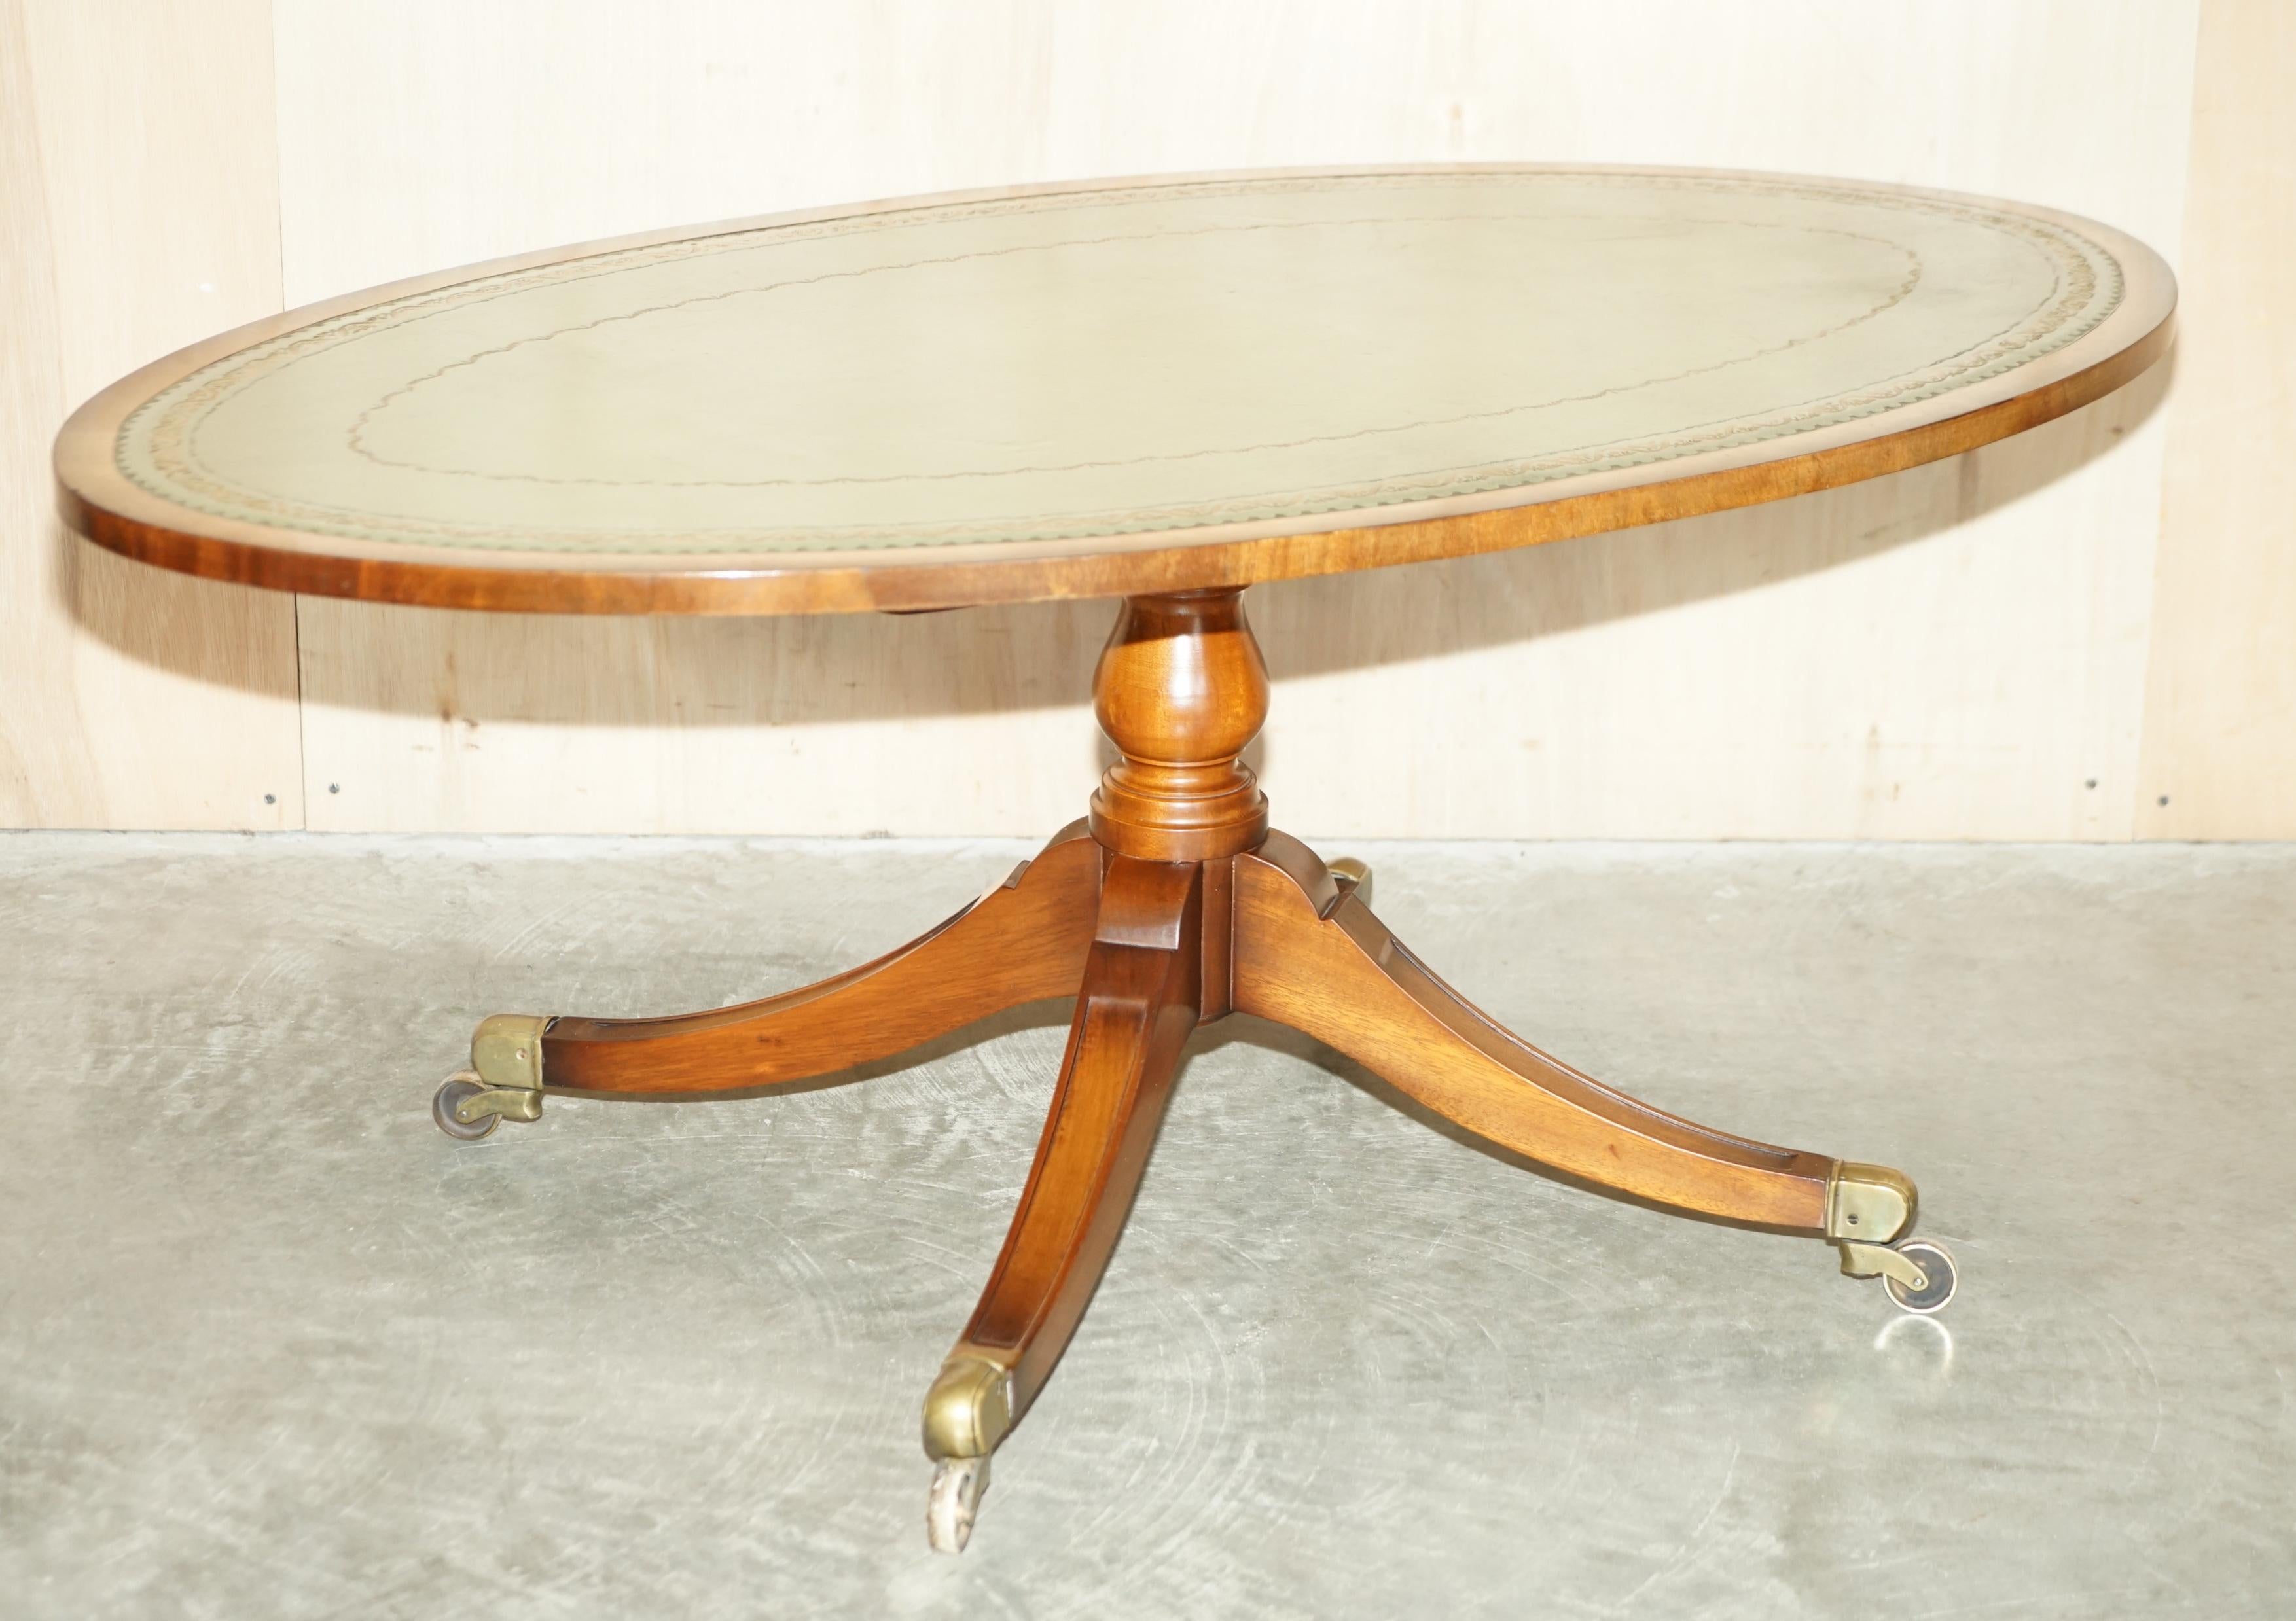 We are delighted to offer for sale this lovely condition antique circa 1900-1920 Walnut & Green Leather Coffee Table with solid English Brass Castors

This is a very well made and versatile piece with a timber patina to die for, the castors are a